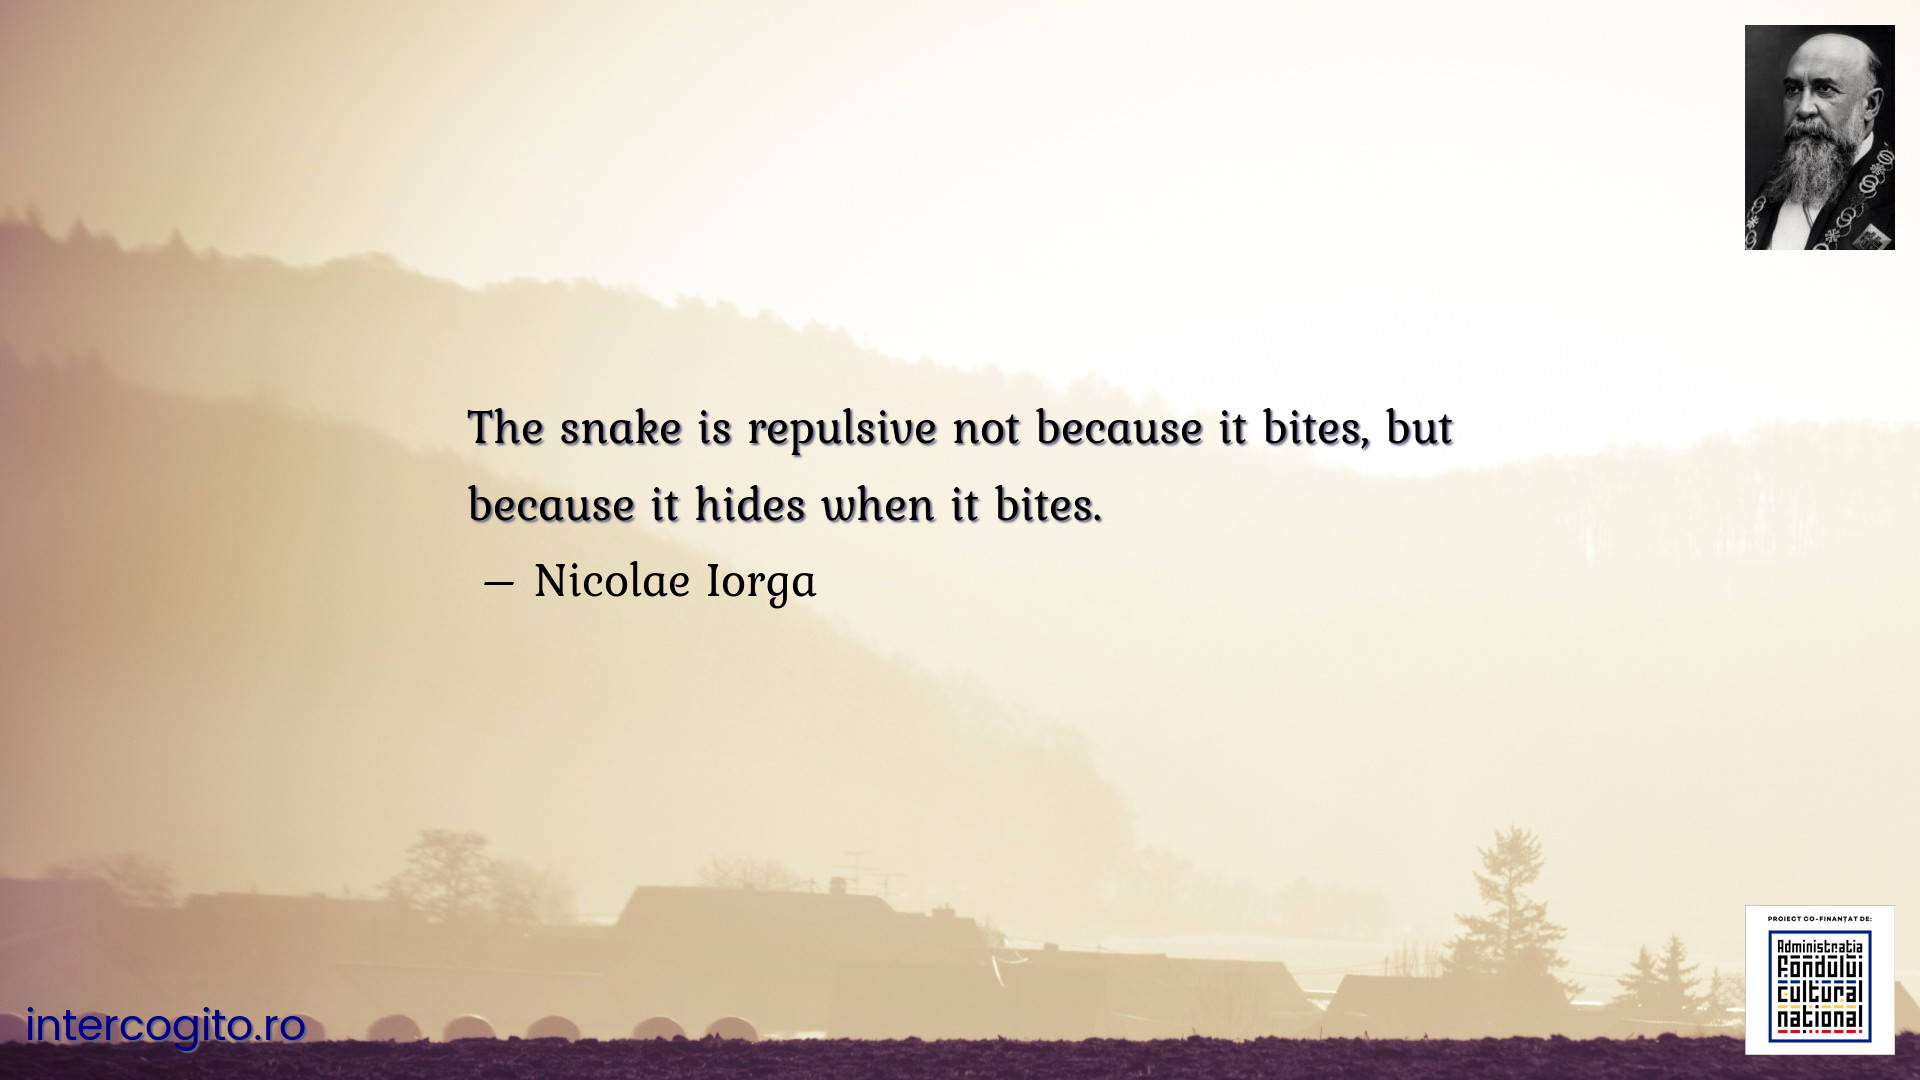 The snake is repulsive not because it bites, but because it hides when it bites.